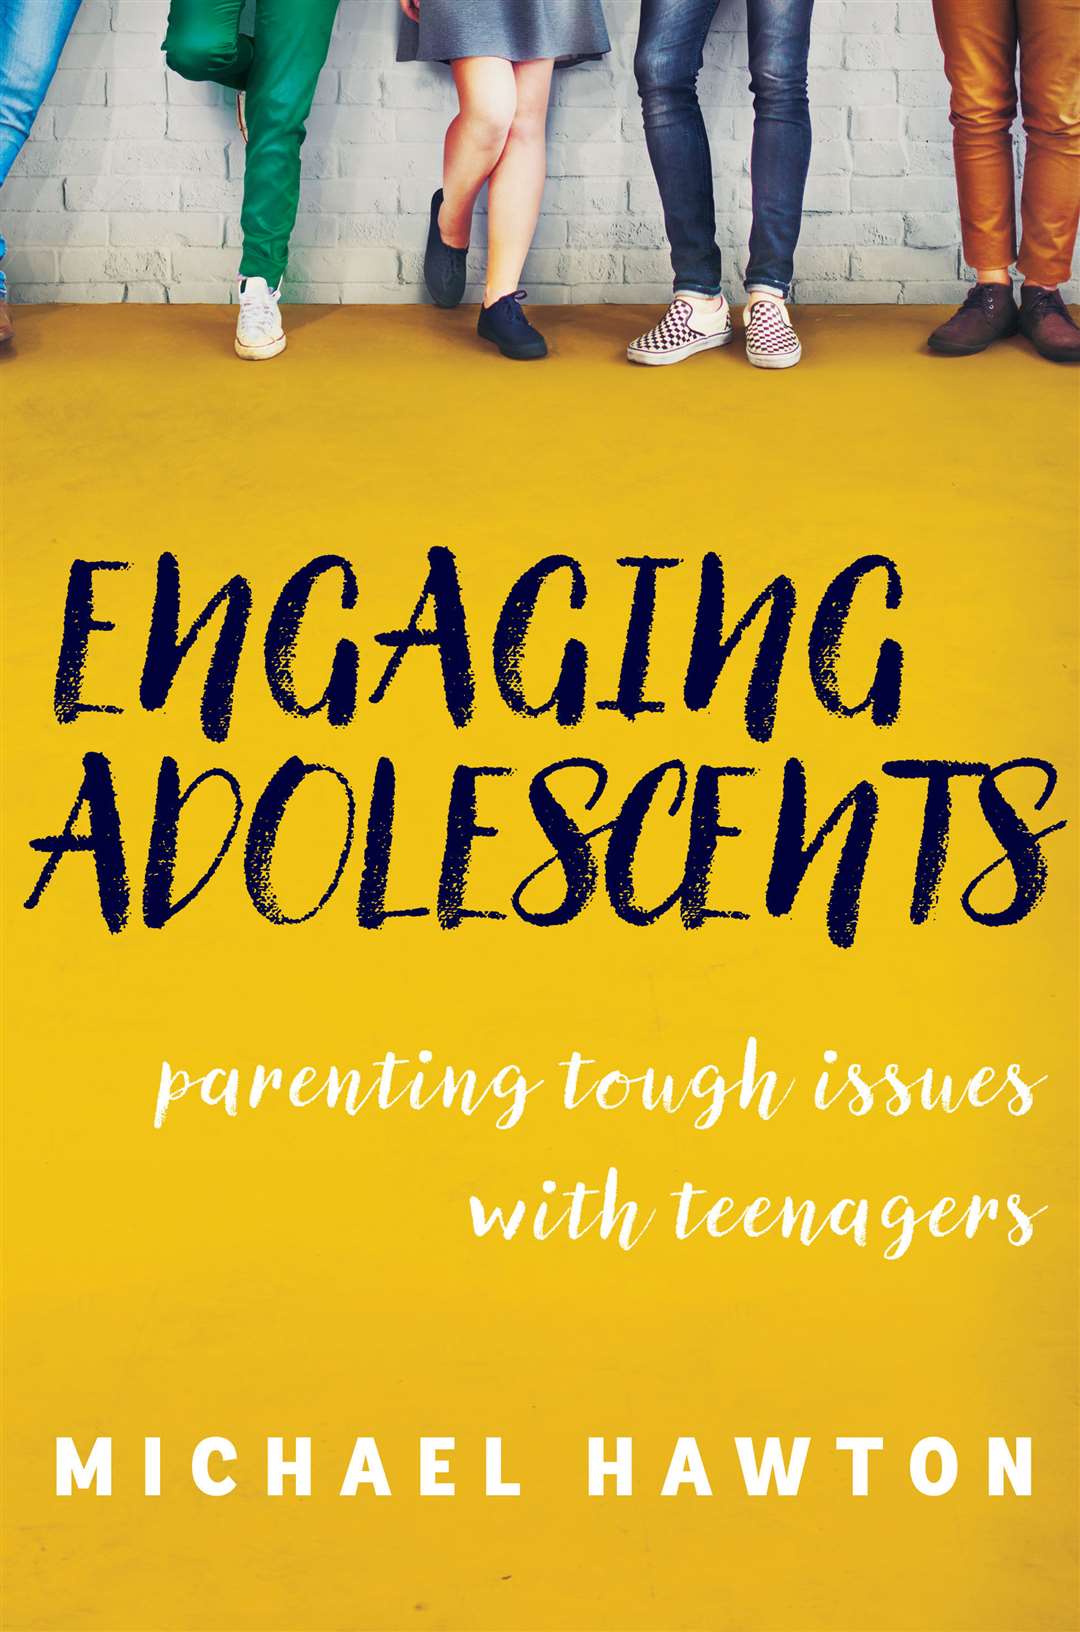 Engaging Adolescents: Parenting Tough Issues With Teenagers by Michael Hawton is published by Exisle Publishing, £14.99